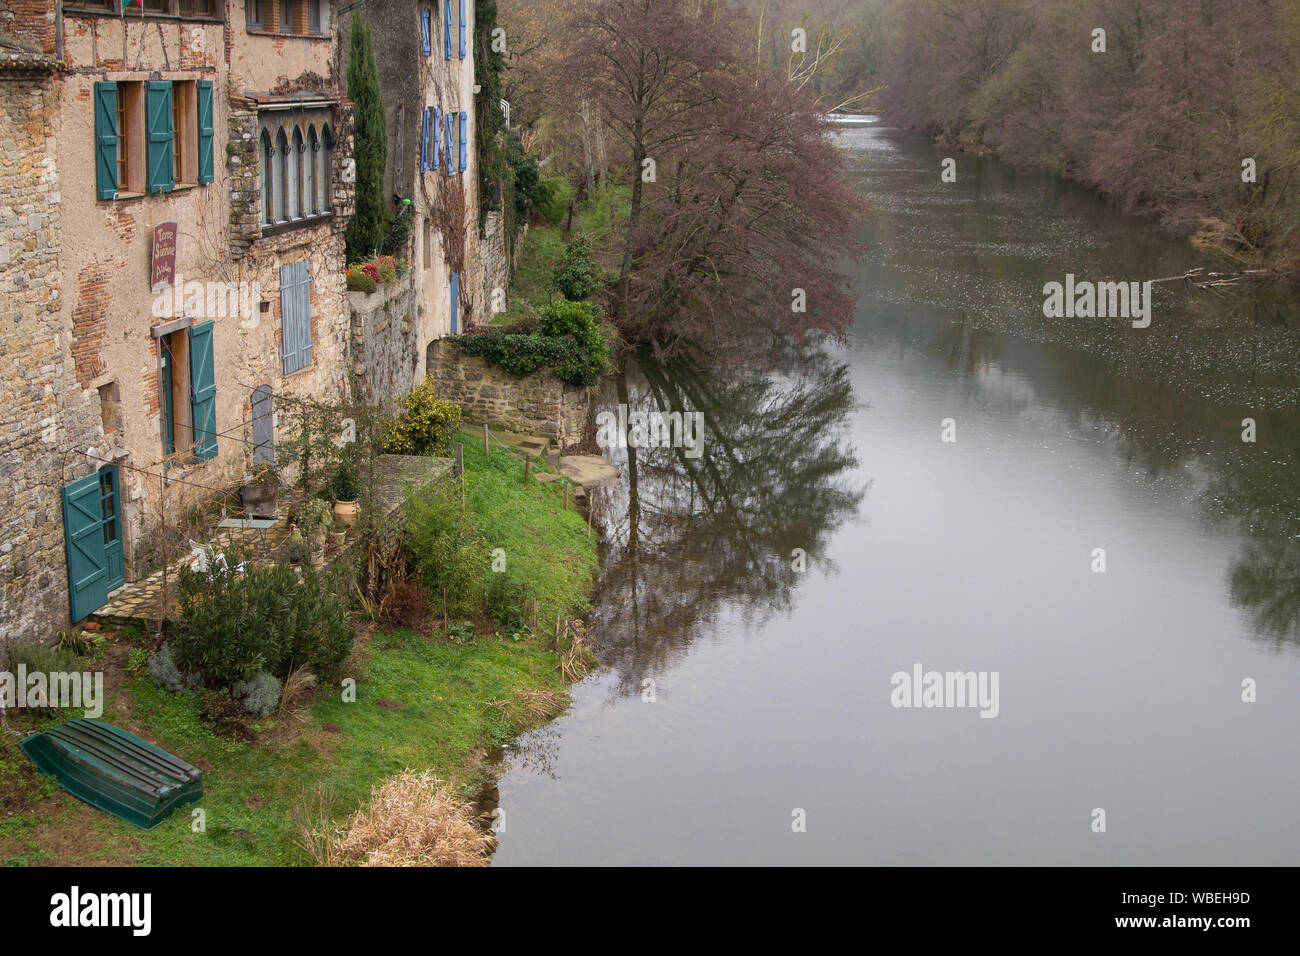 Saint-Antonin-Noble-Val, France - January 08, 2013: houses, streets, river and architecture of the village Stock Photo